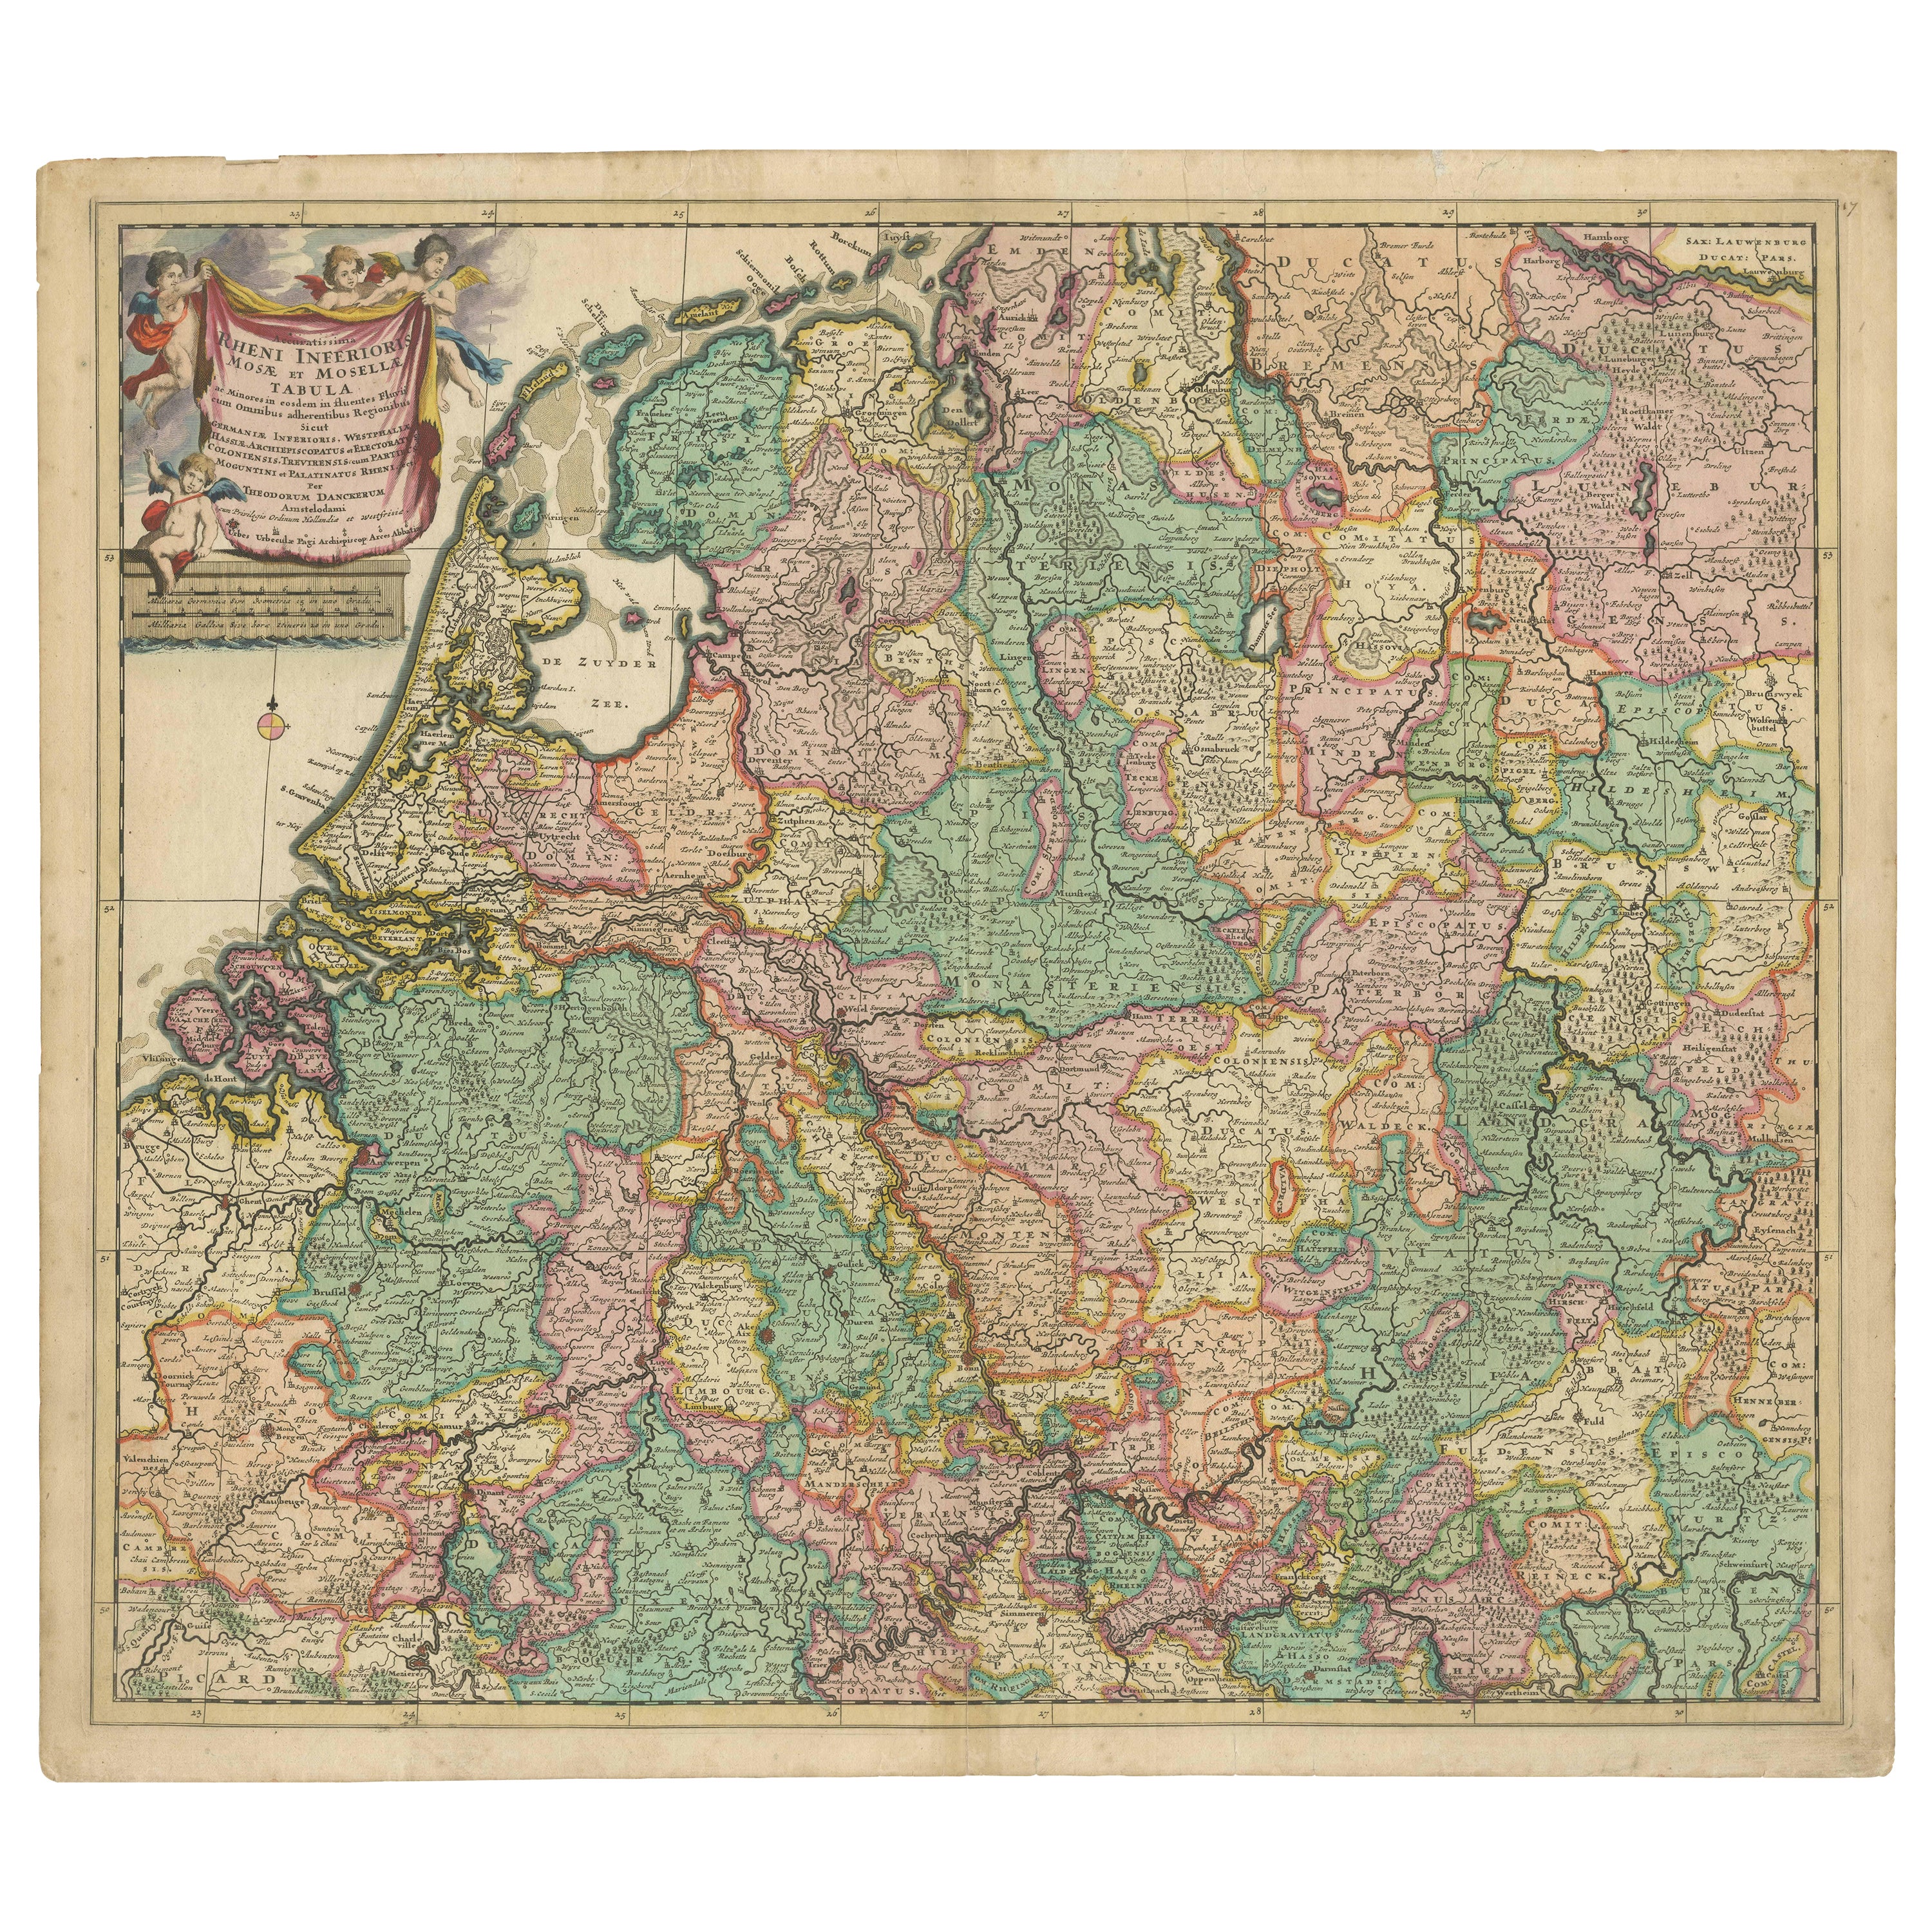 Rare Theodore Danckerts Map of the Lower Rhine and Moselle River Regions For Sale